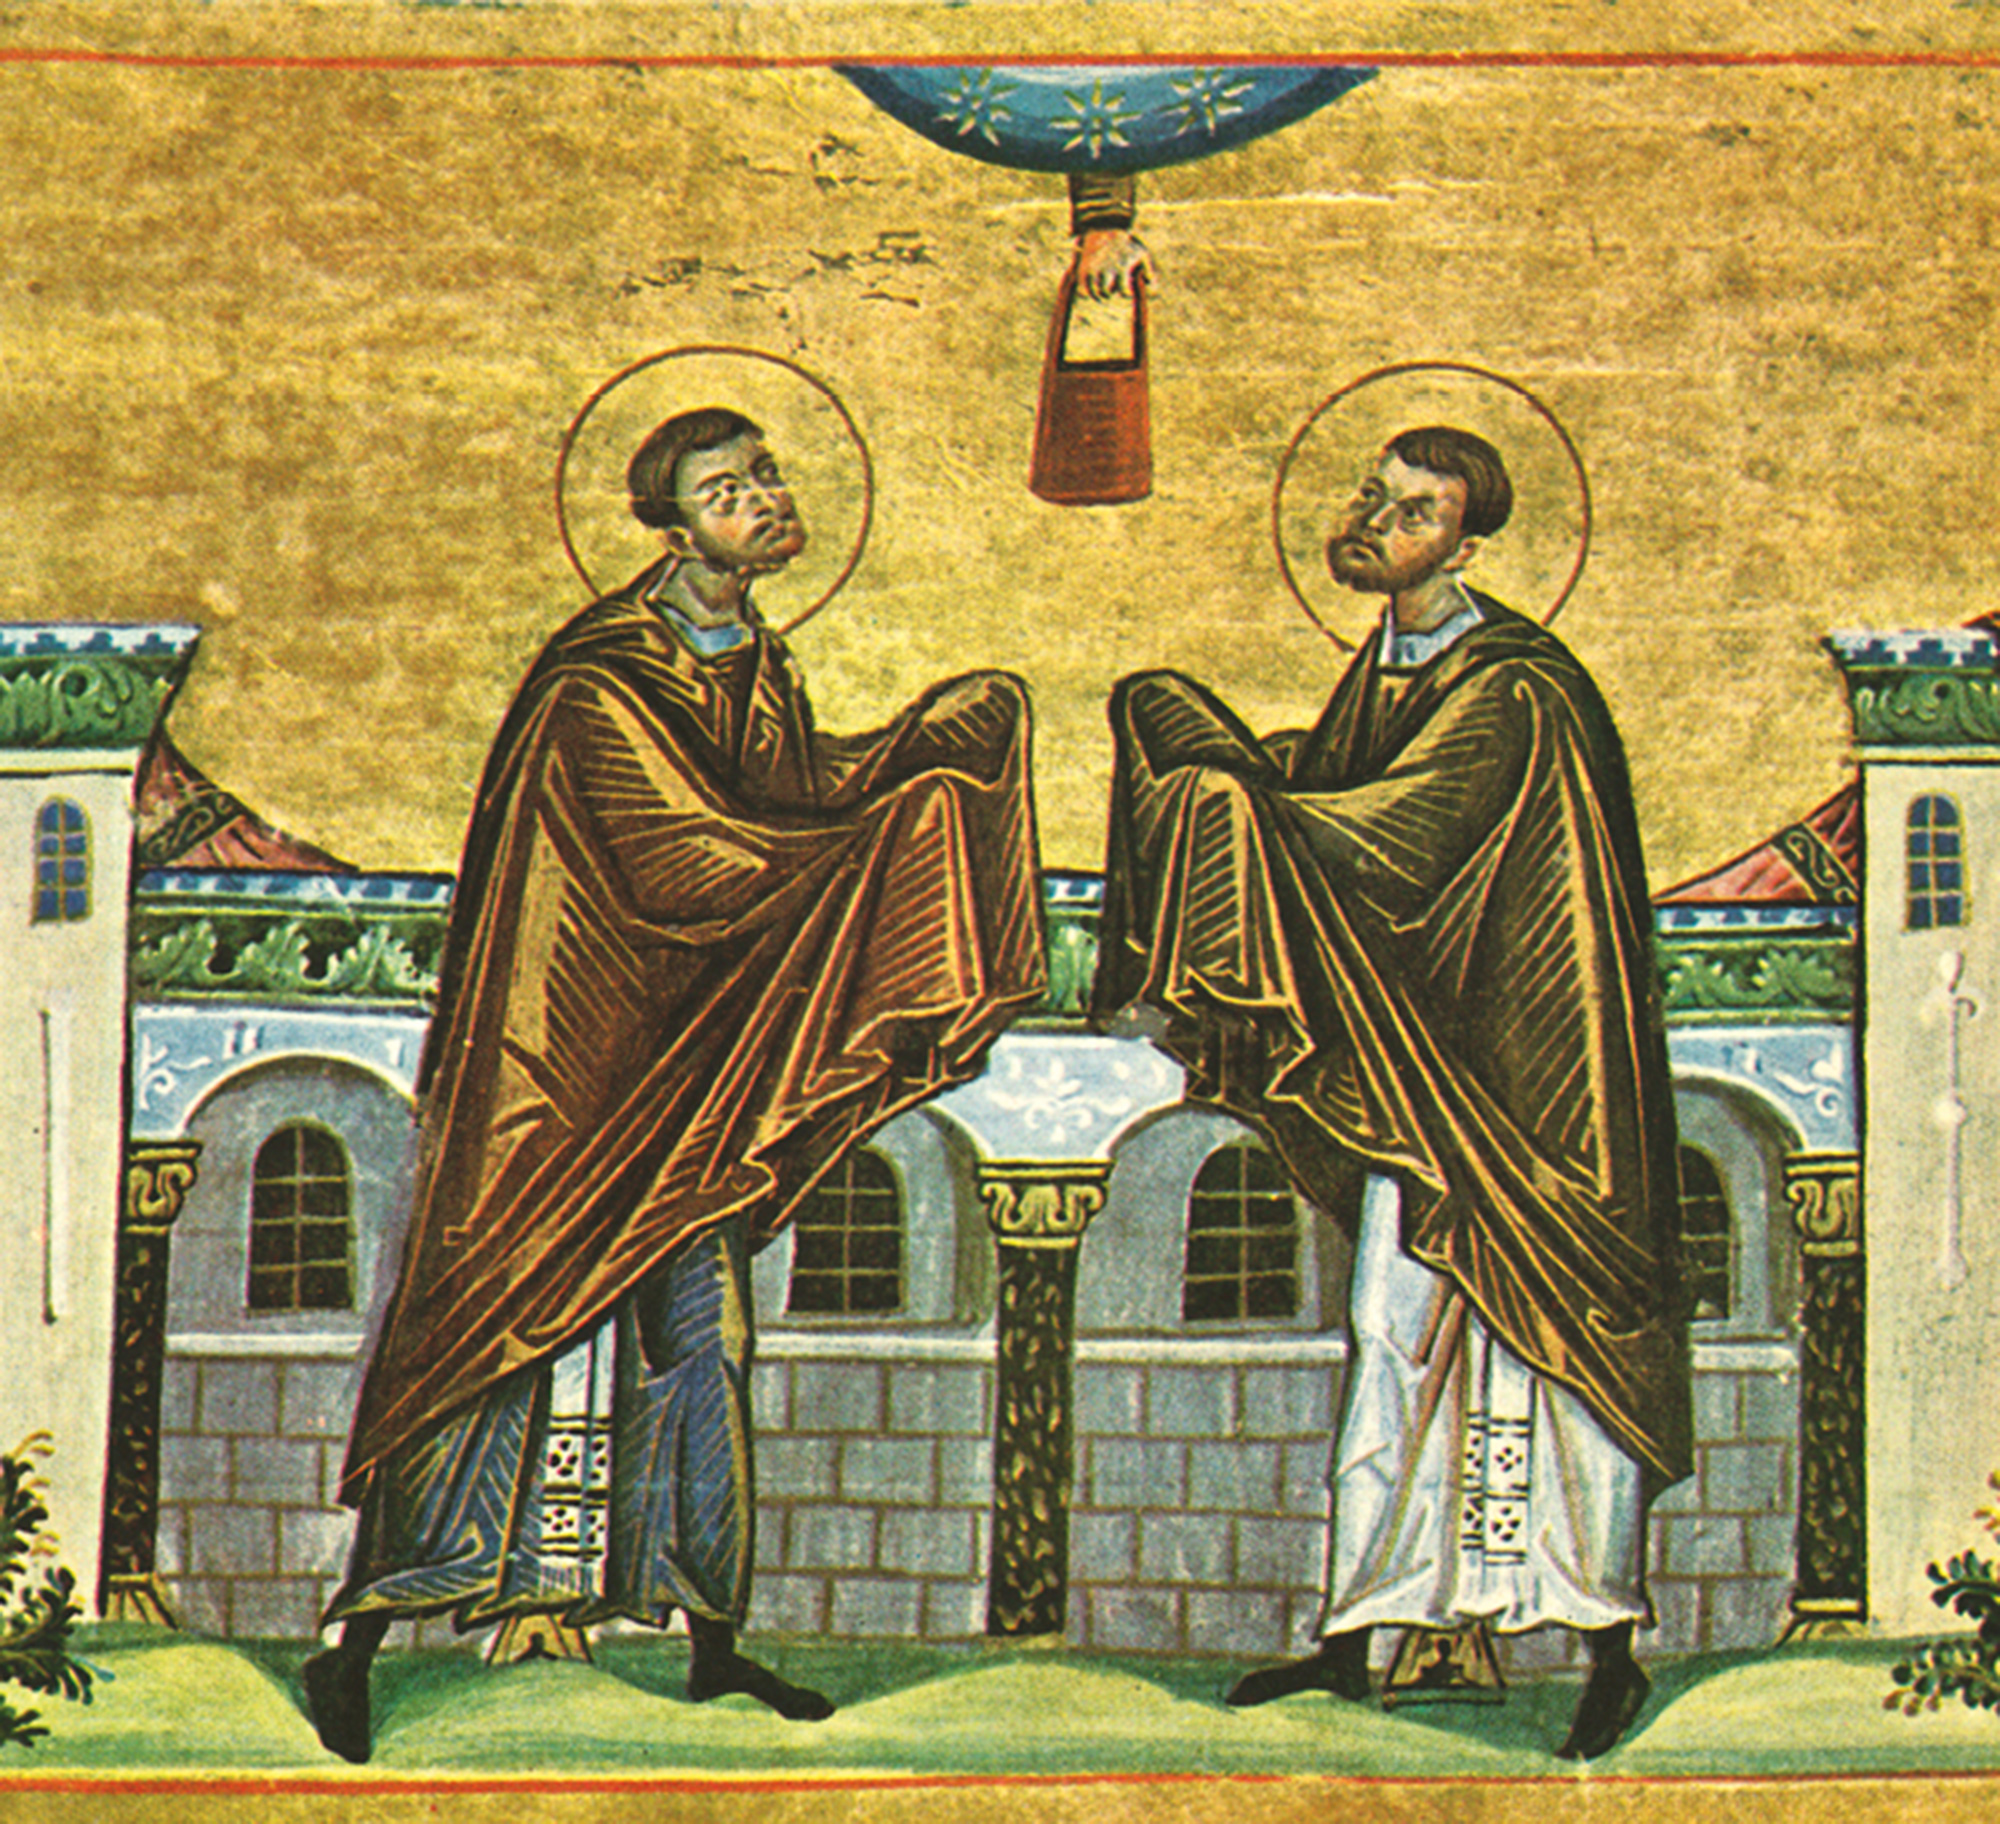 An illustration of the Cosmas and Damian receiving the gift of healing. From the Byzantine manuscript Menologion of Basil 2, after nine seventy-nine CE.